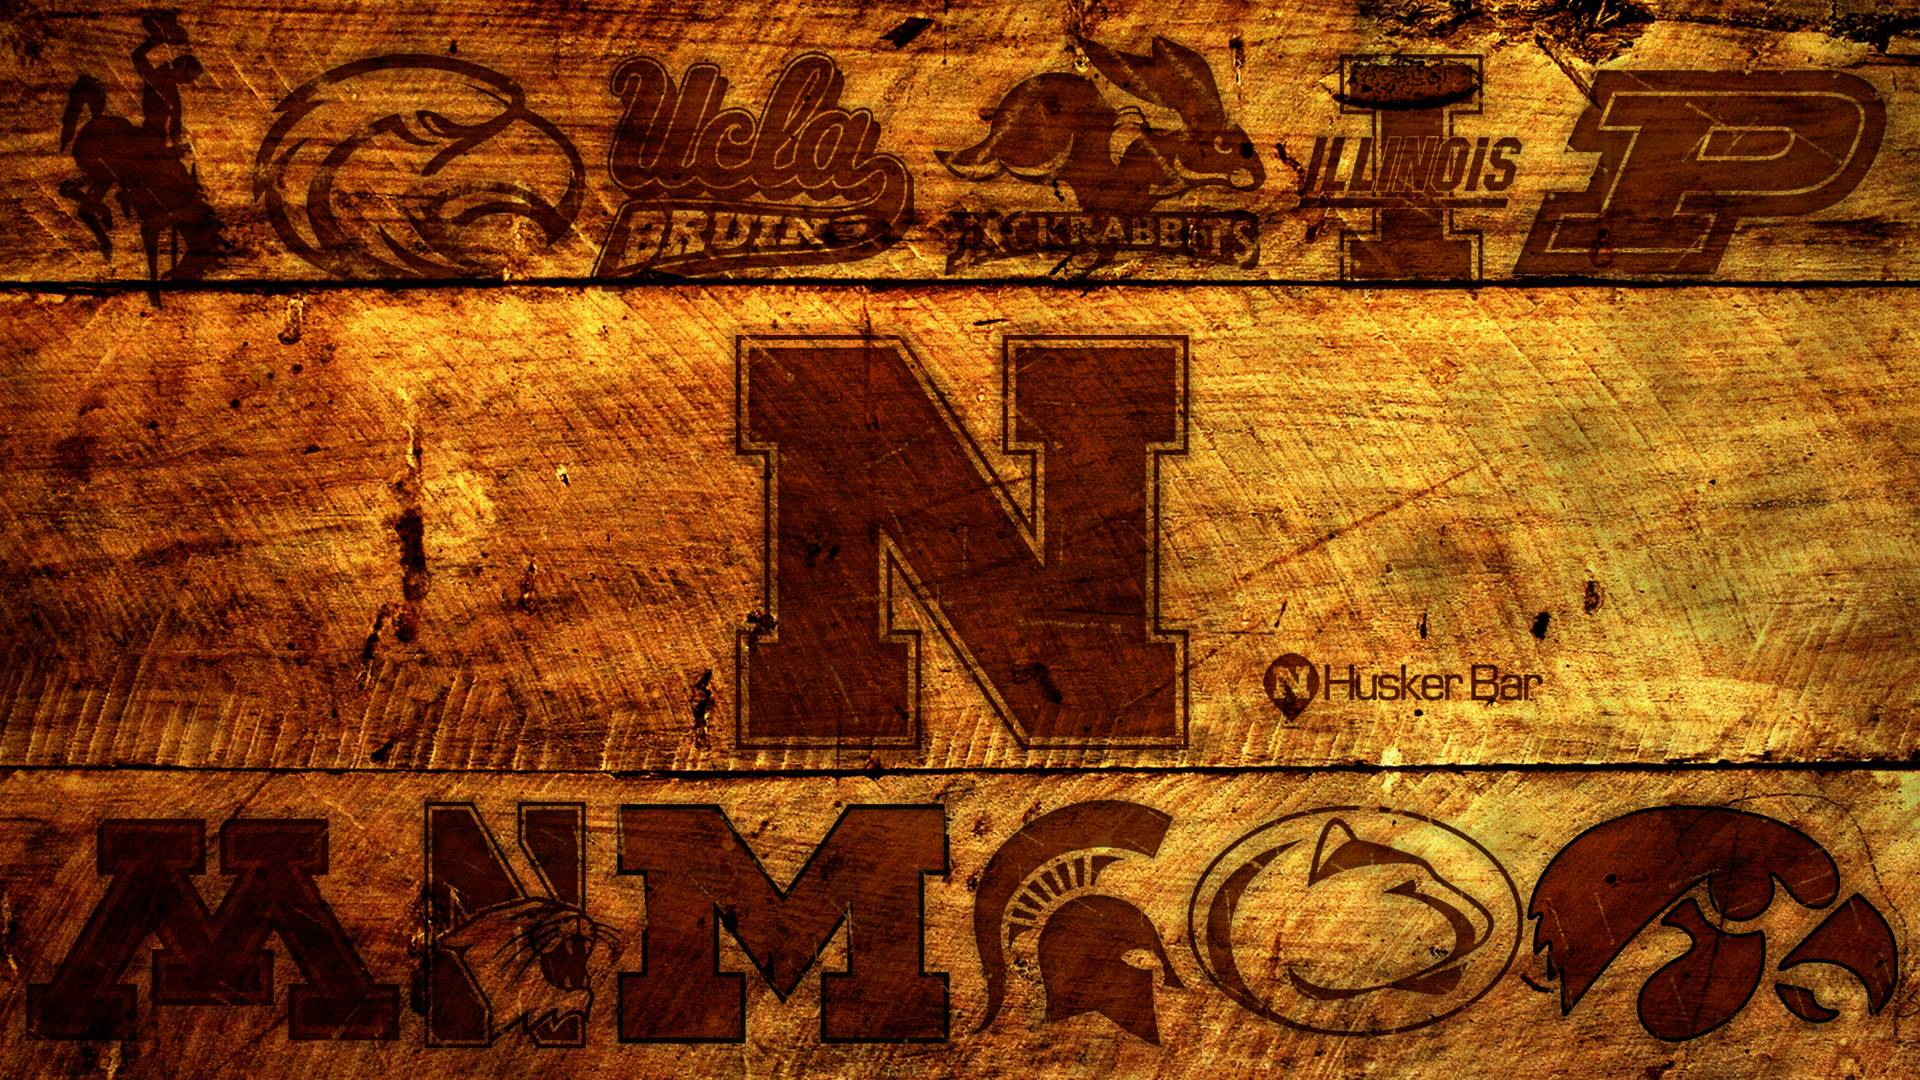 2013 Husker Football Schedule Wallpaper, Facebook Cover Photo and